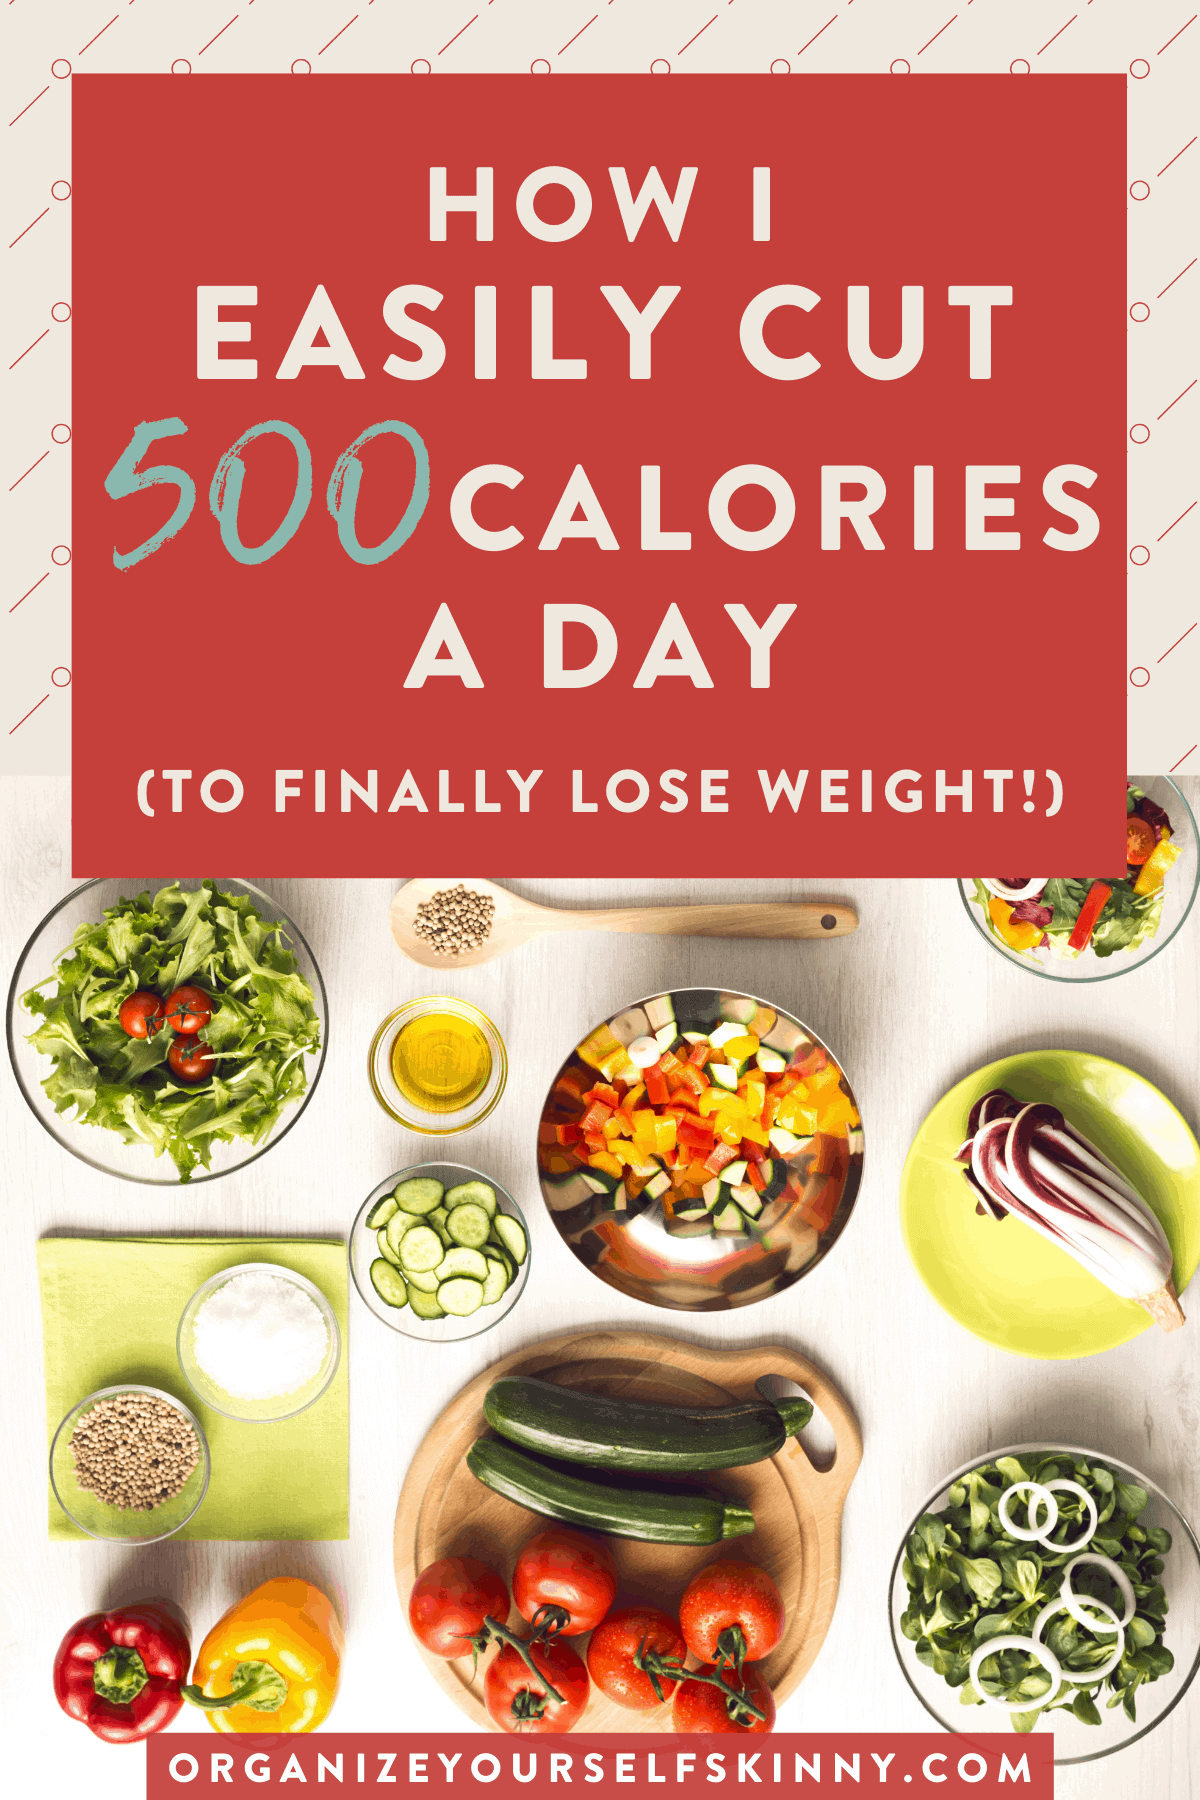 how-to-easily-cut-calories-a day